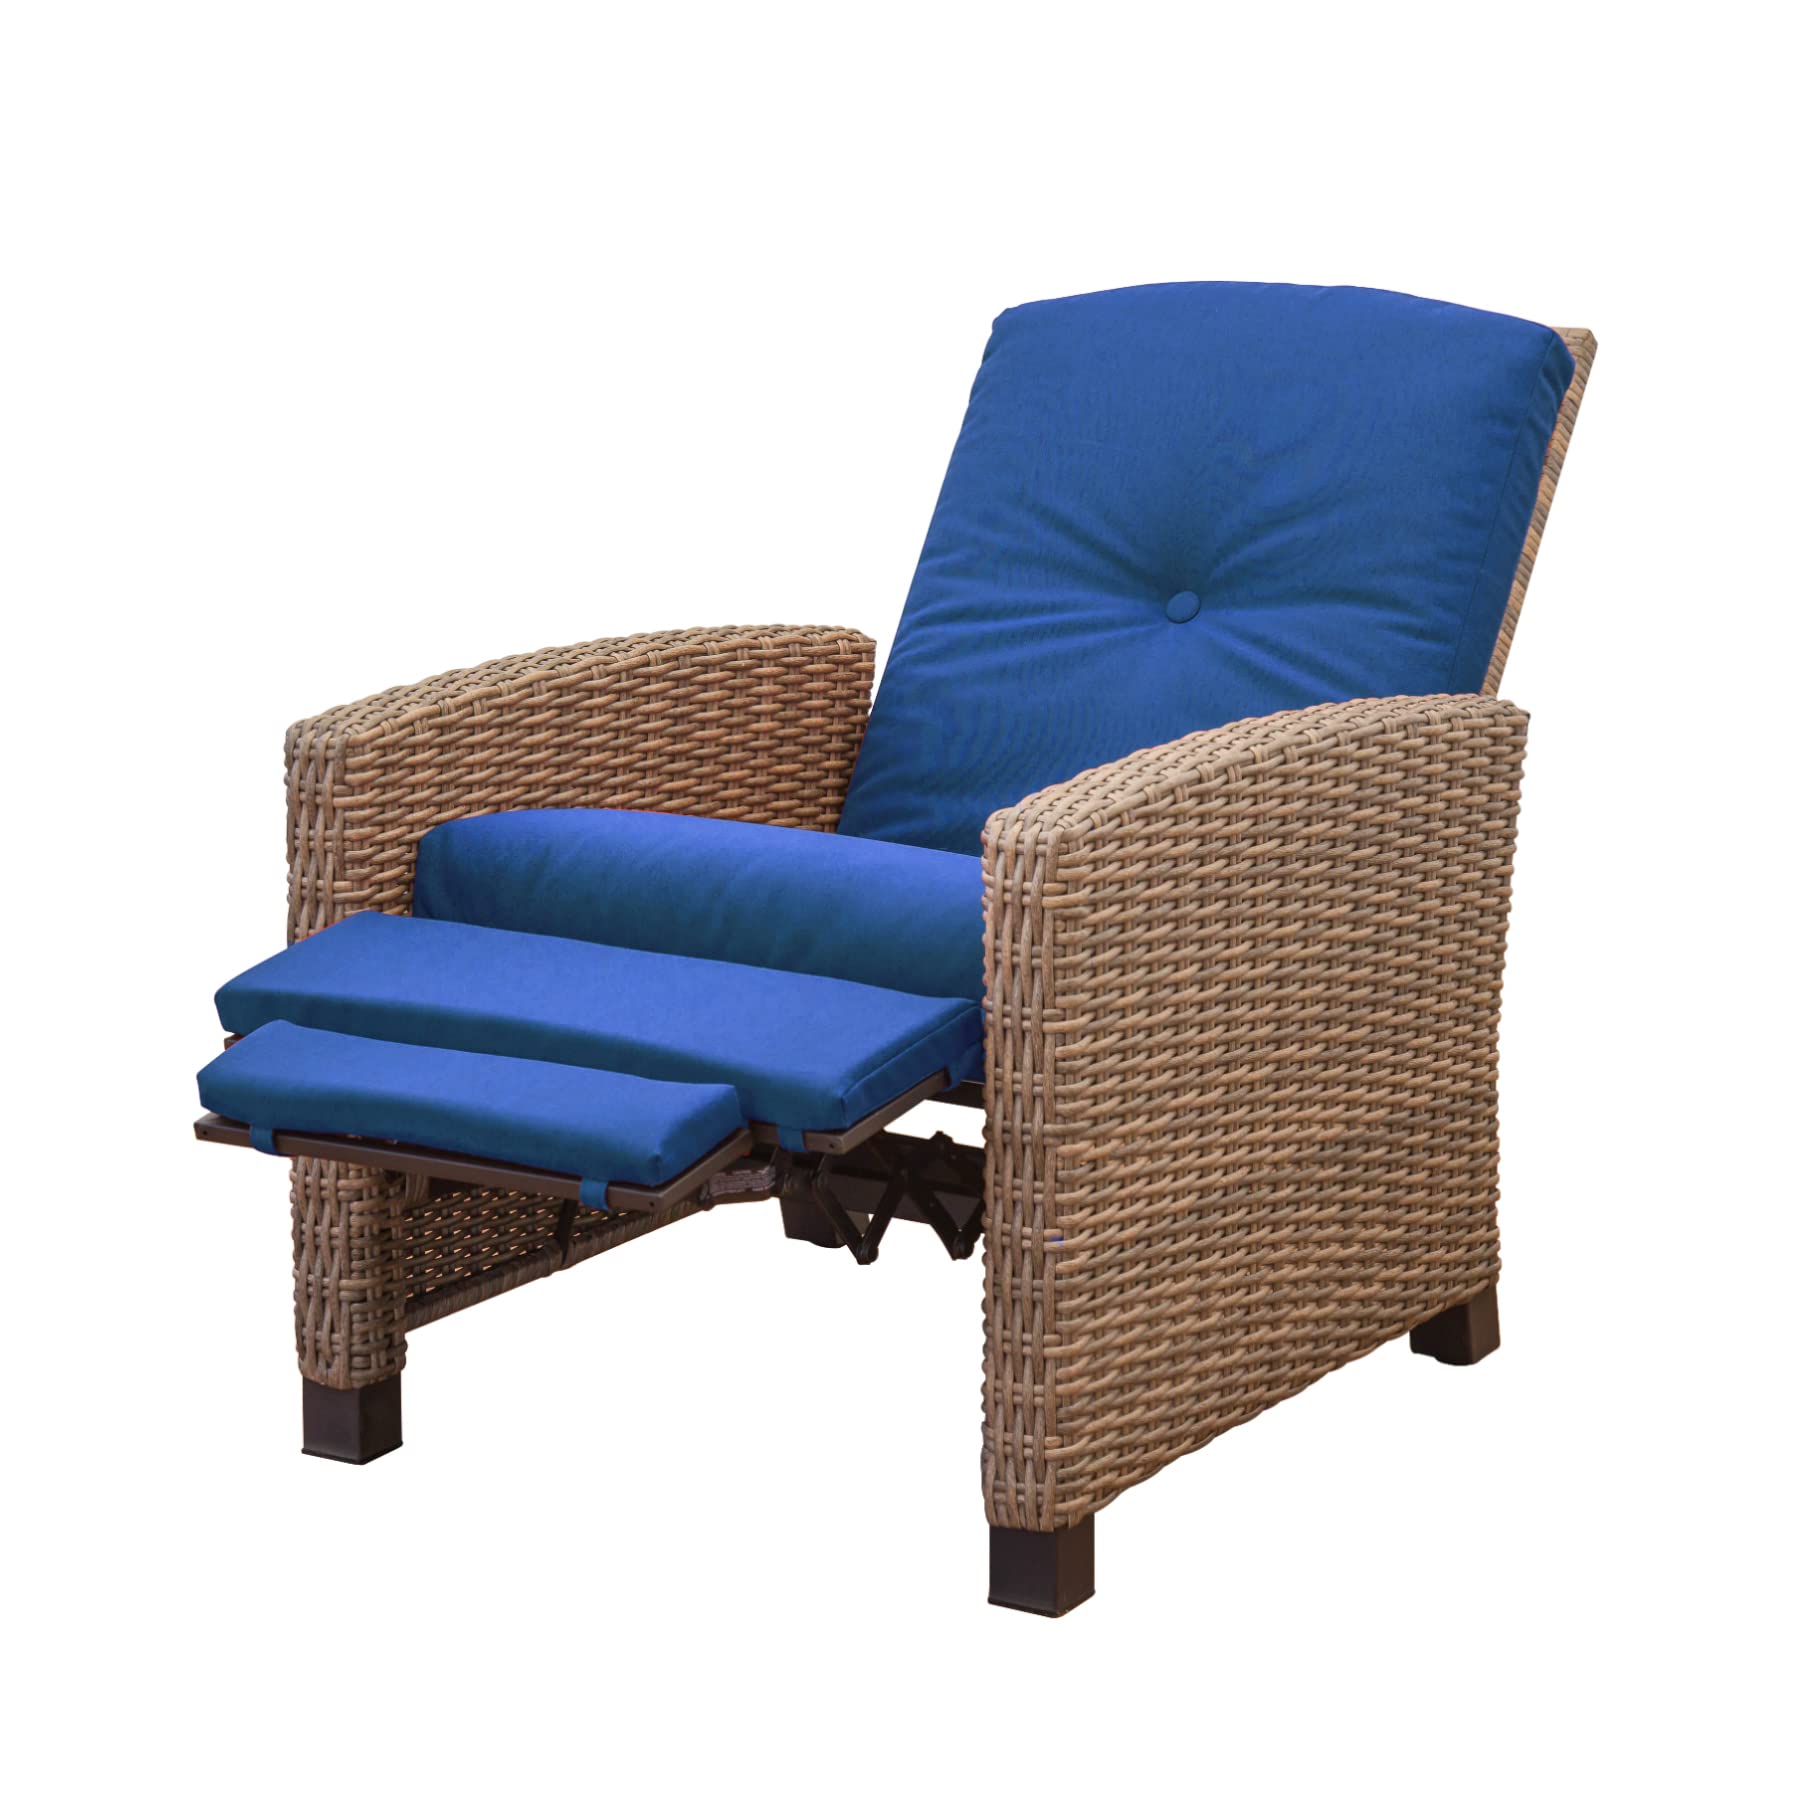 Domi Indoor & Outdoor All-Weather Wicker Recliner Patio Chair, Comfortable Reclining Seating - image 1 of 9